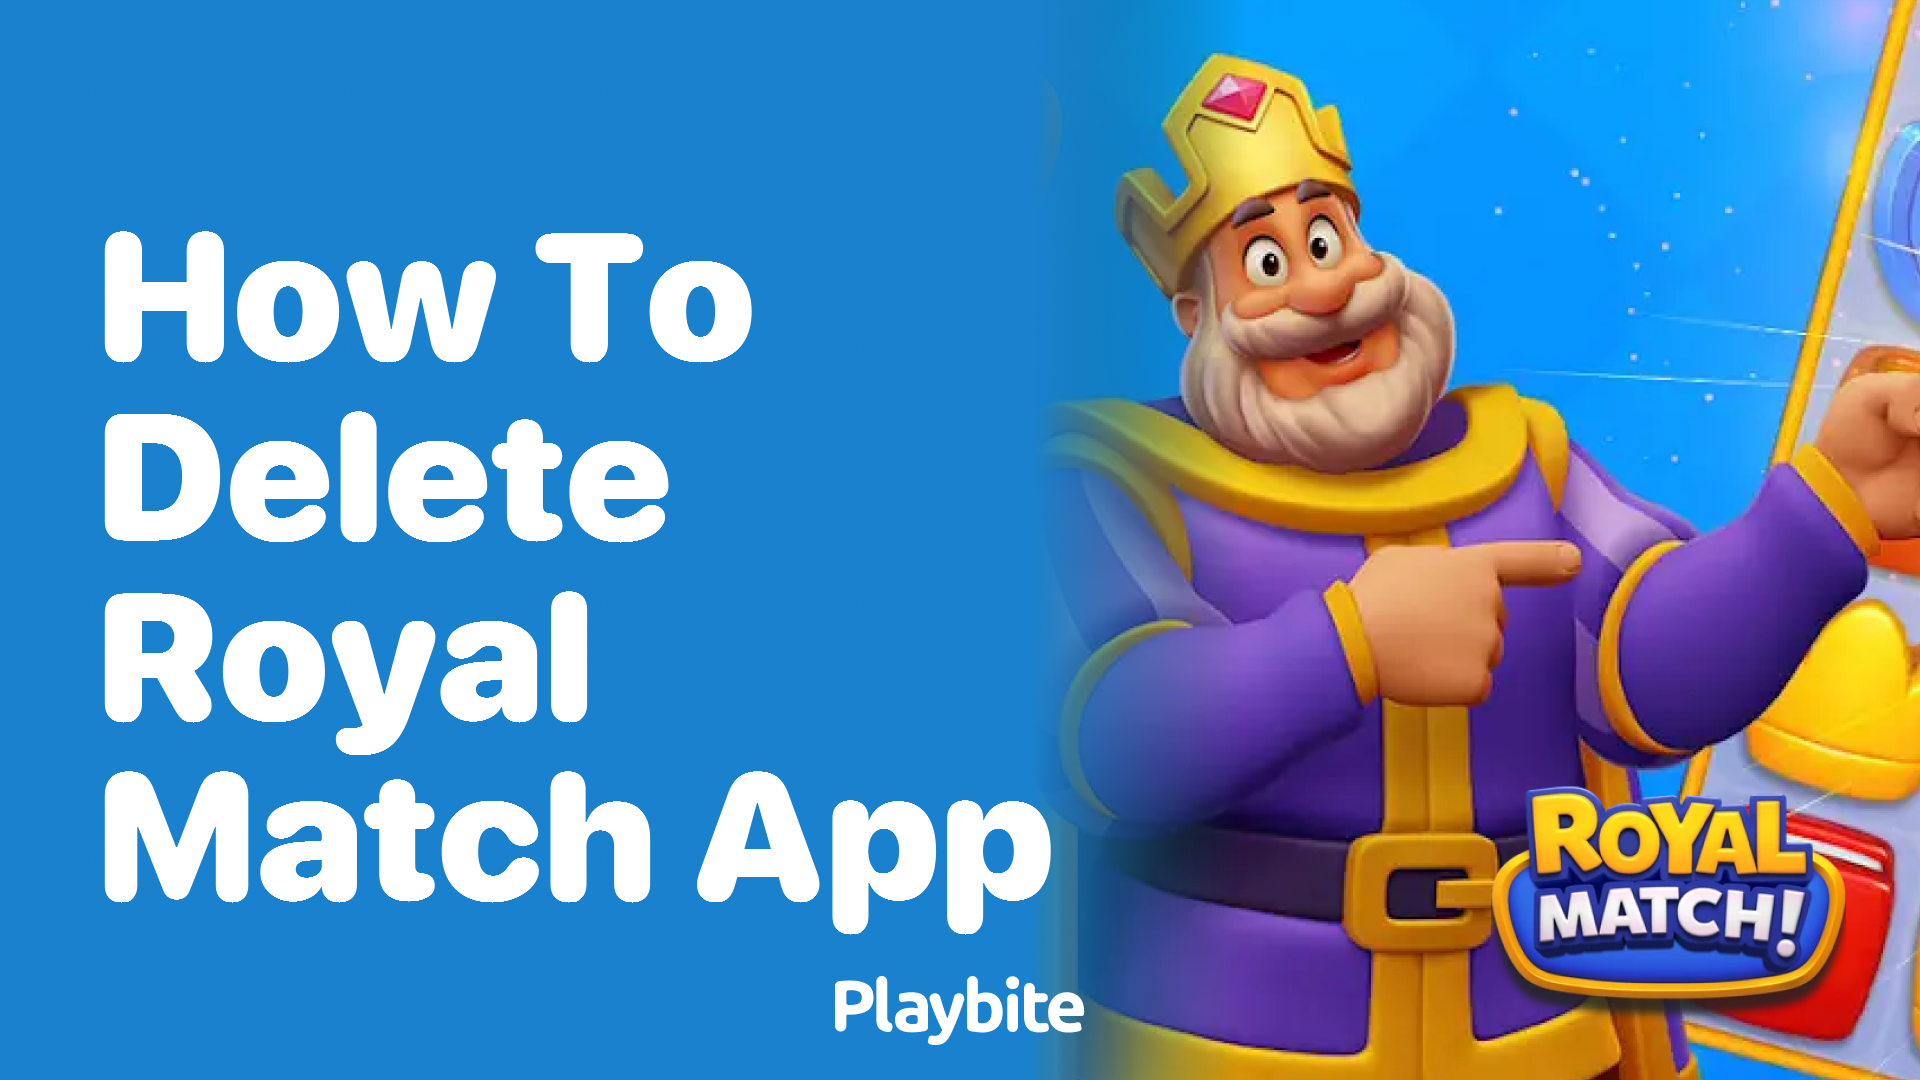 How to Delete Royal Match App: Step-by-Step Guide